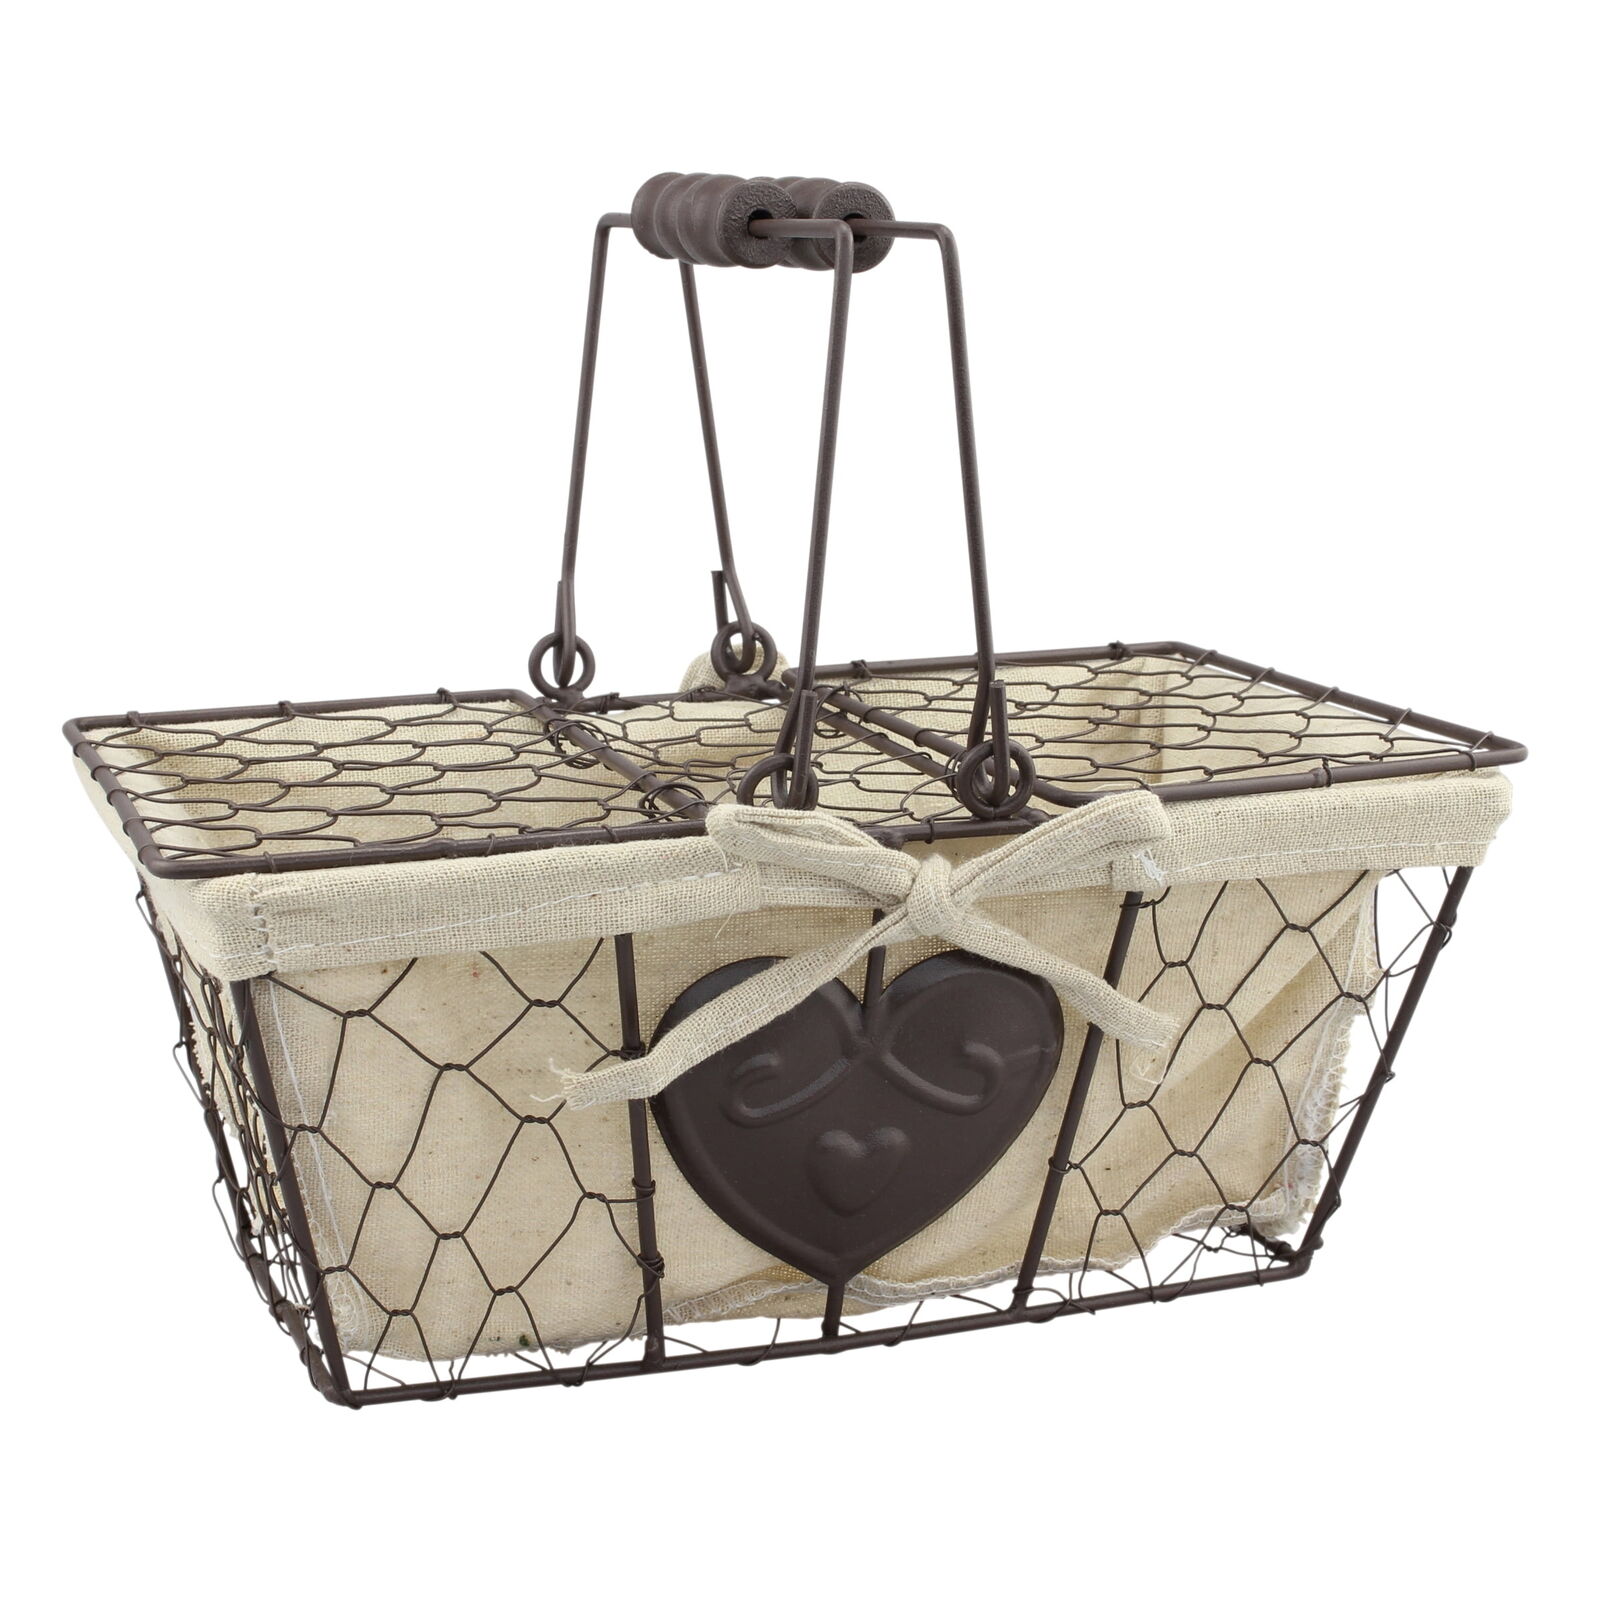 10.7“ x 6.5”Chicken Wire Metal Decorative Picnic Basket with Fabric Lining,Cream